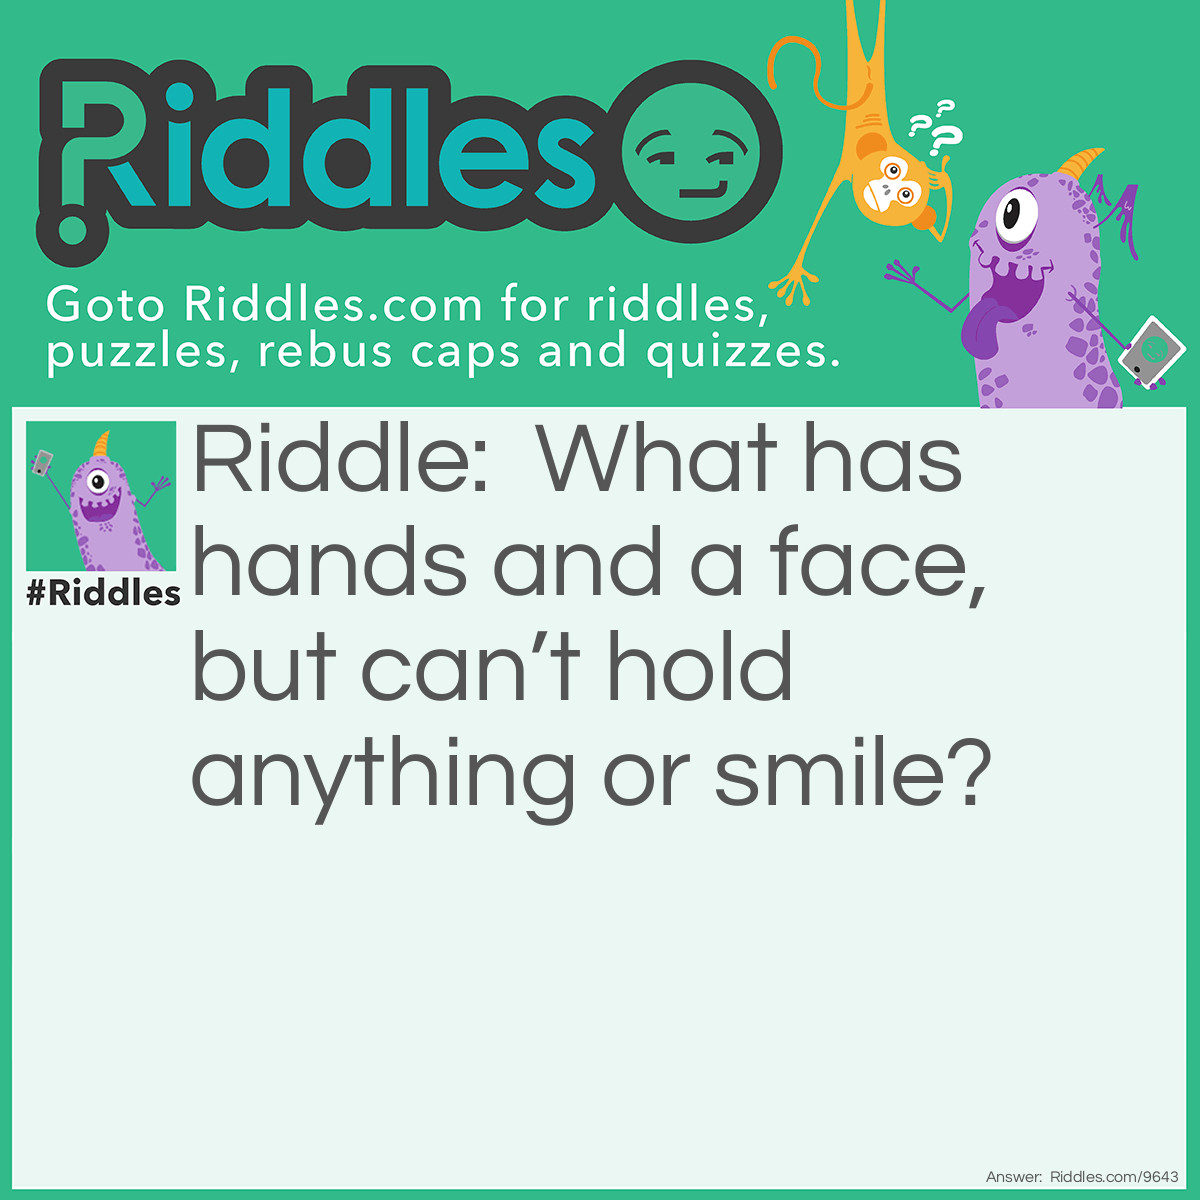 Riddle: What has hands and a face, but can't hold anything or smile? Answer: A clock.